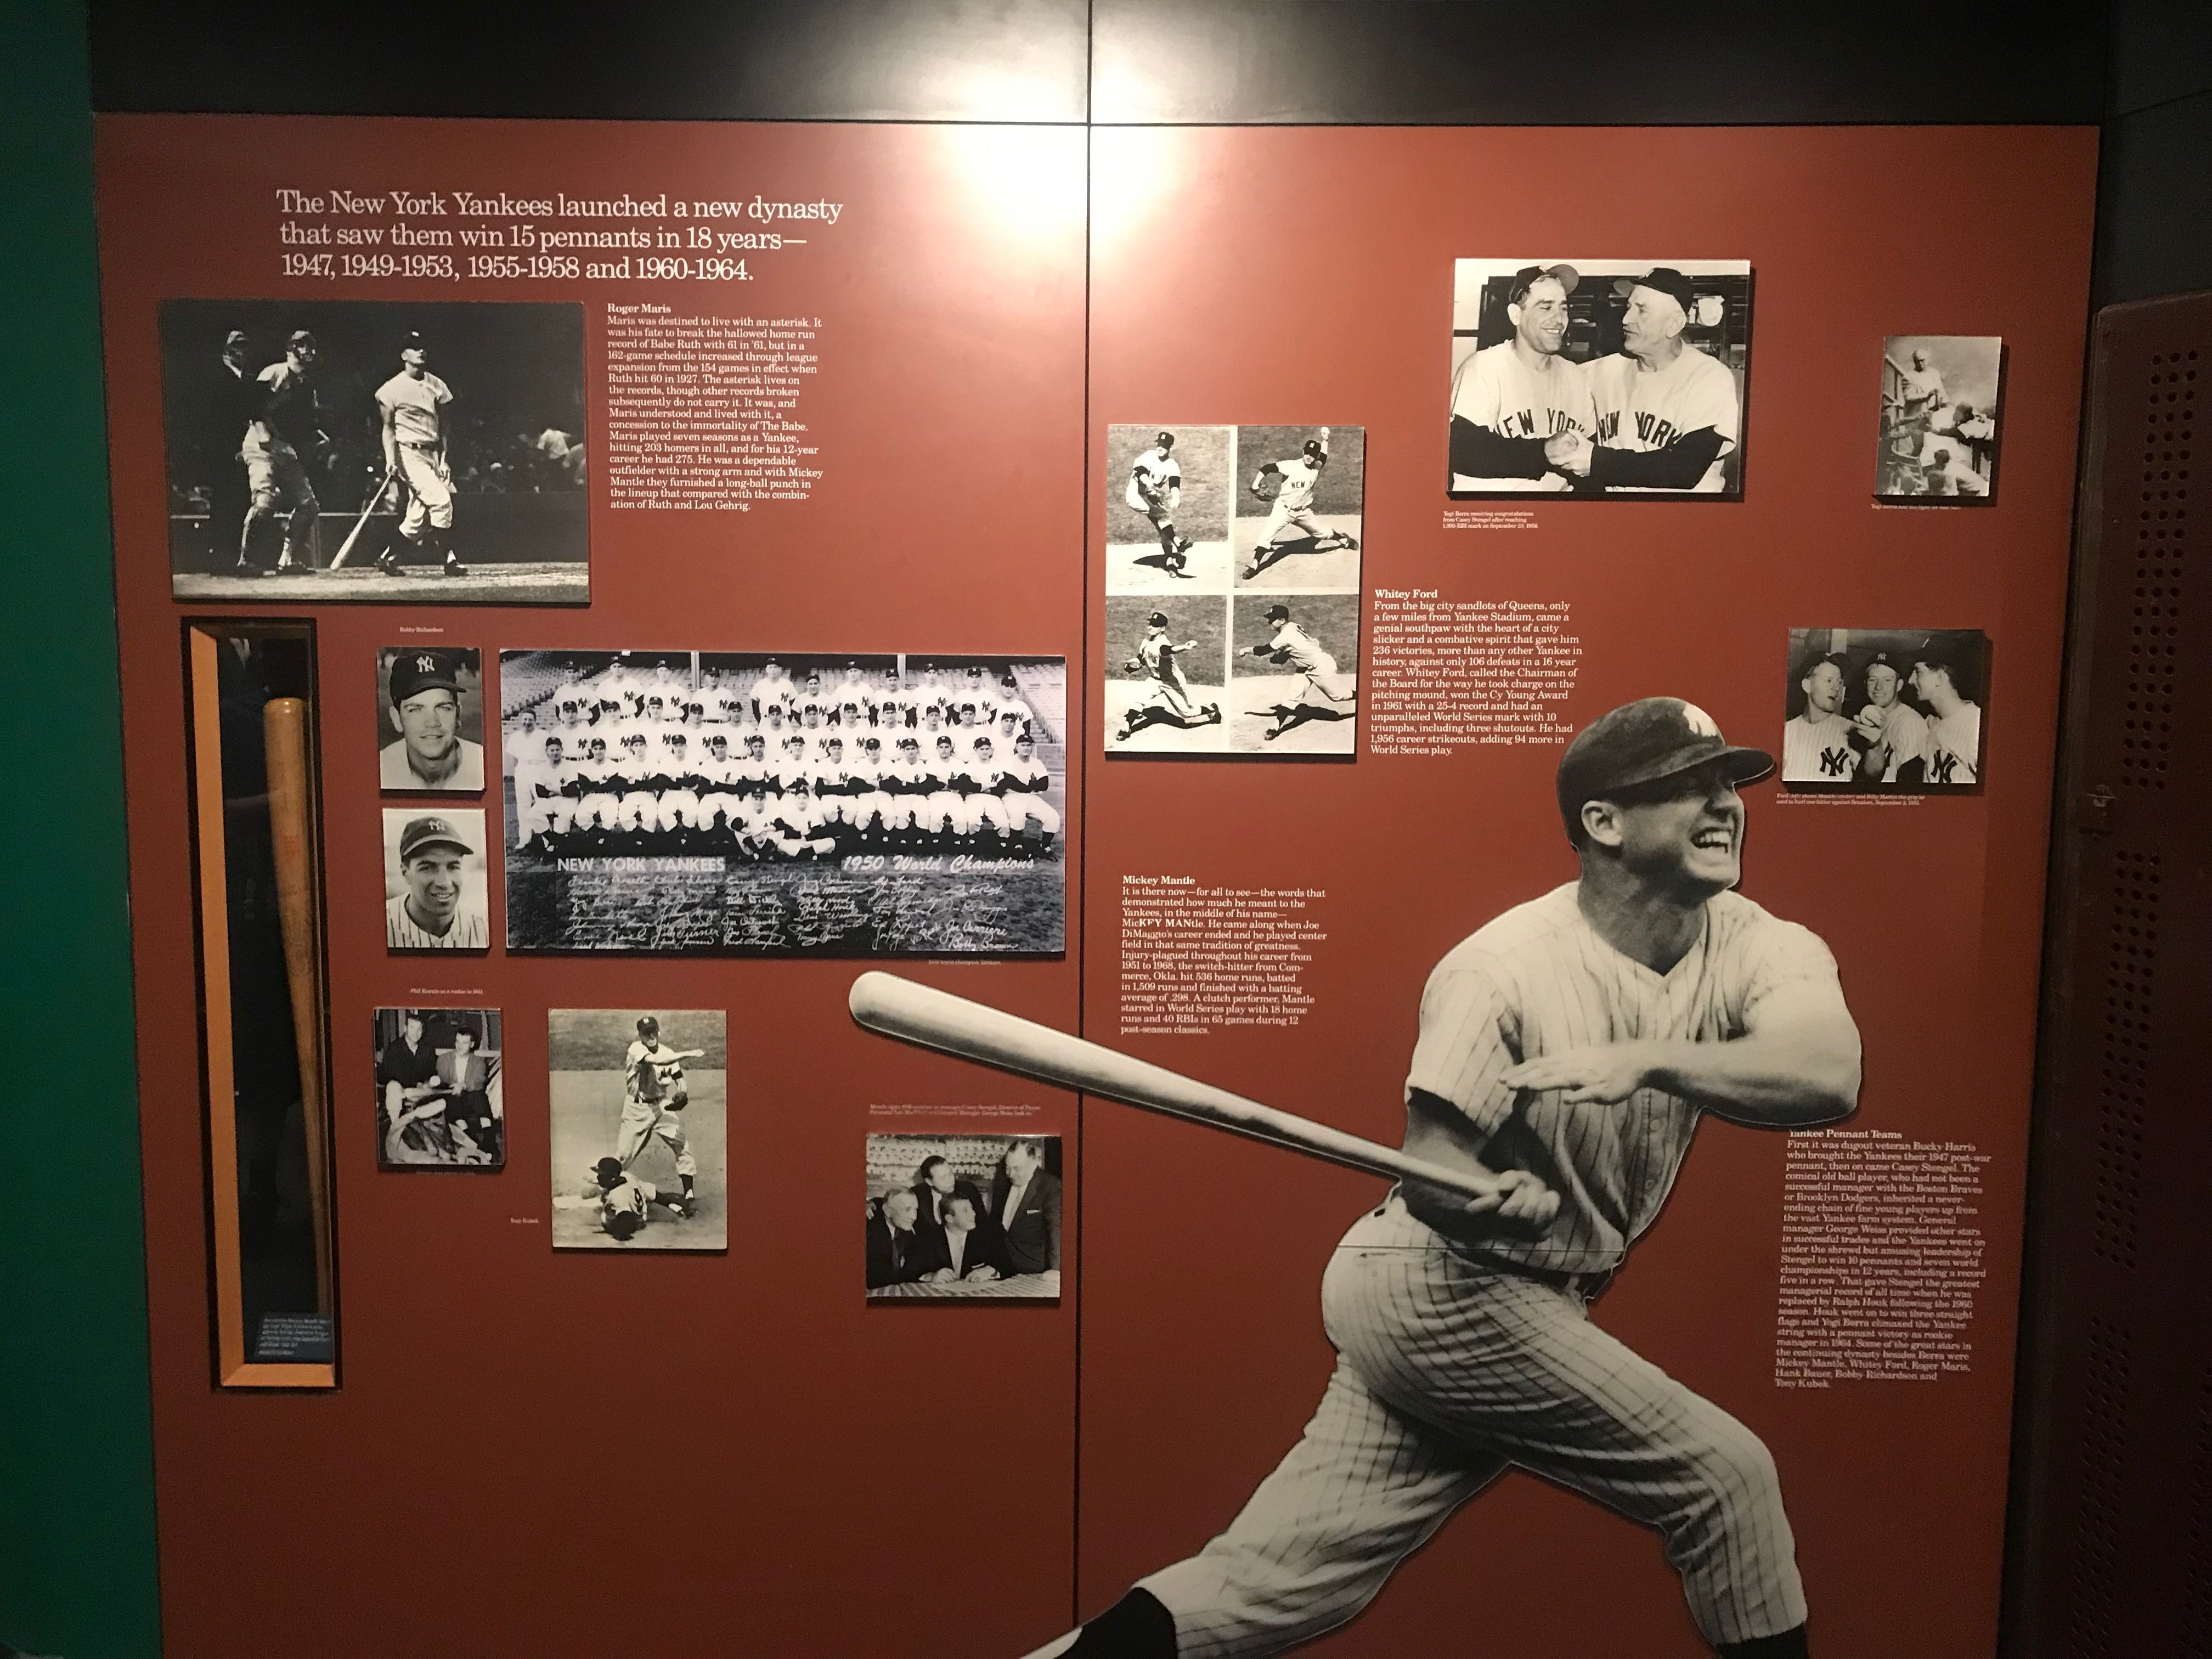 National Baseball Hall of Fame and Museum - Happy Charlie